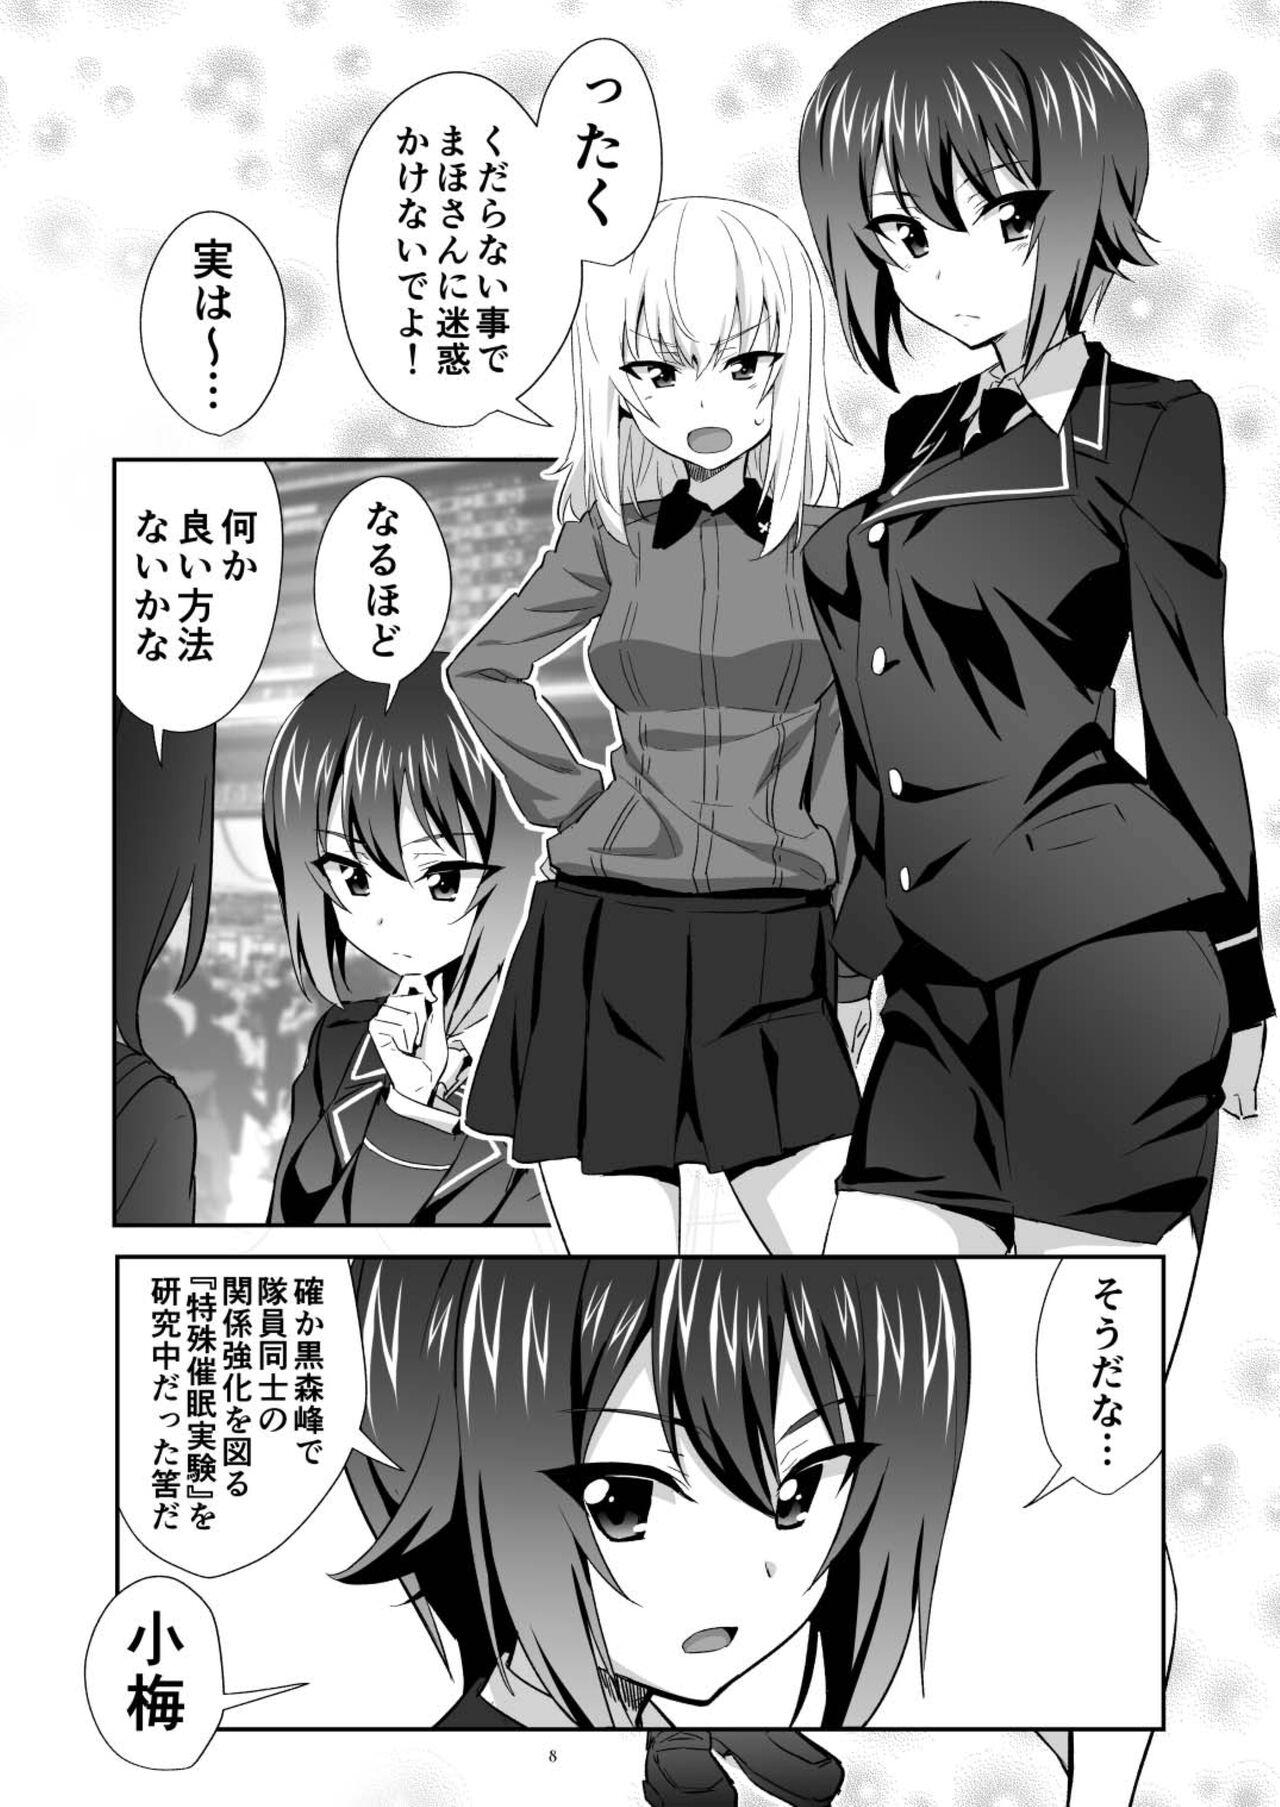 Gay Physicals TURIME-DO 8 - Girls und panzer Toy - Page 8